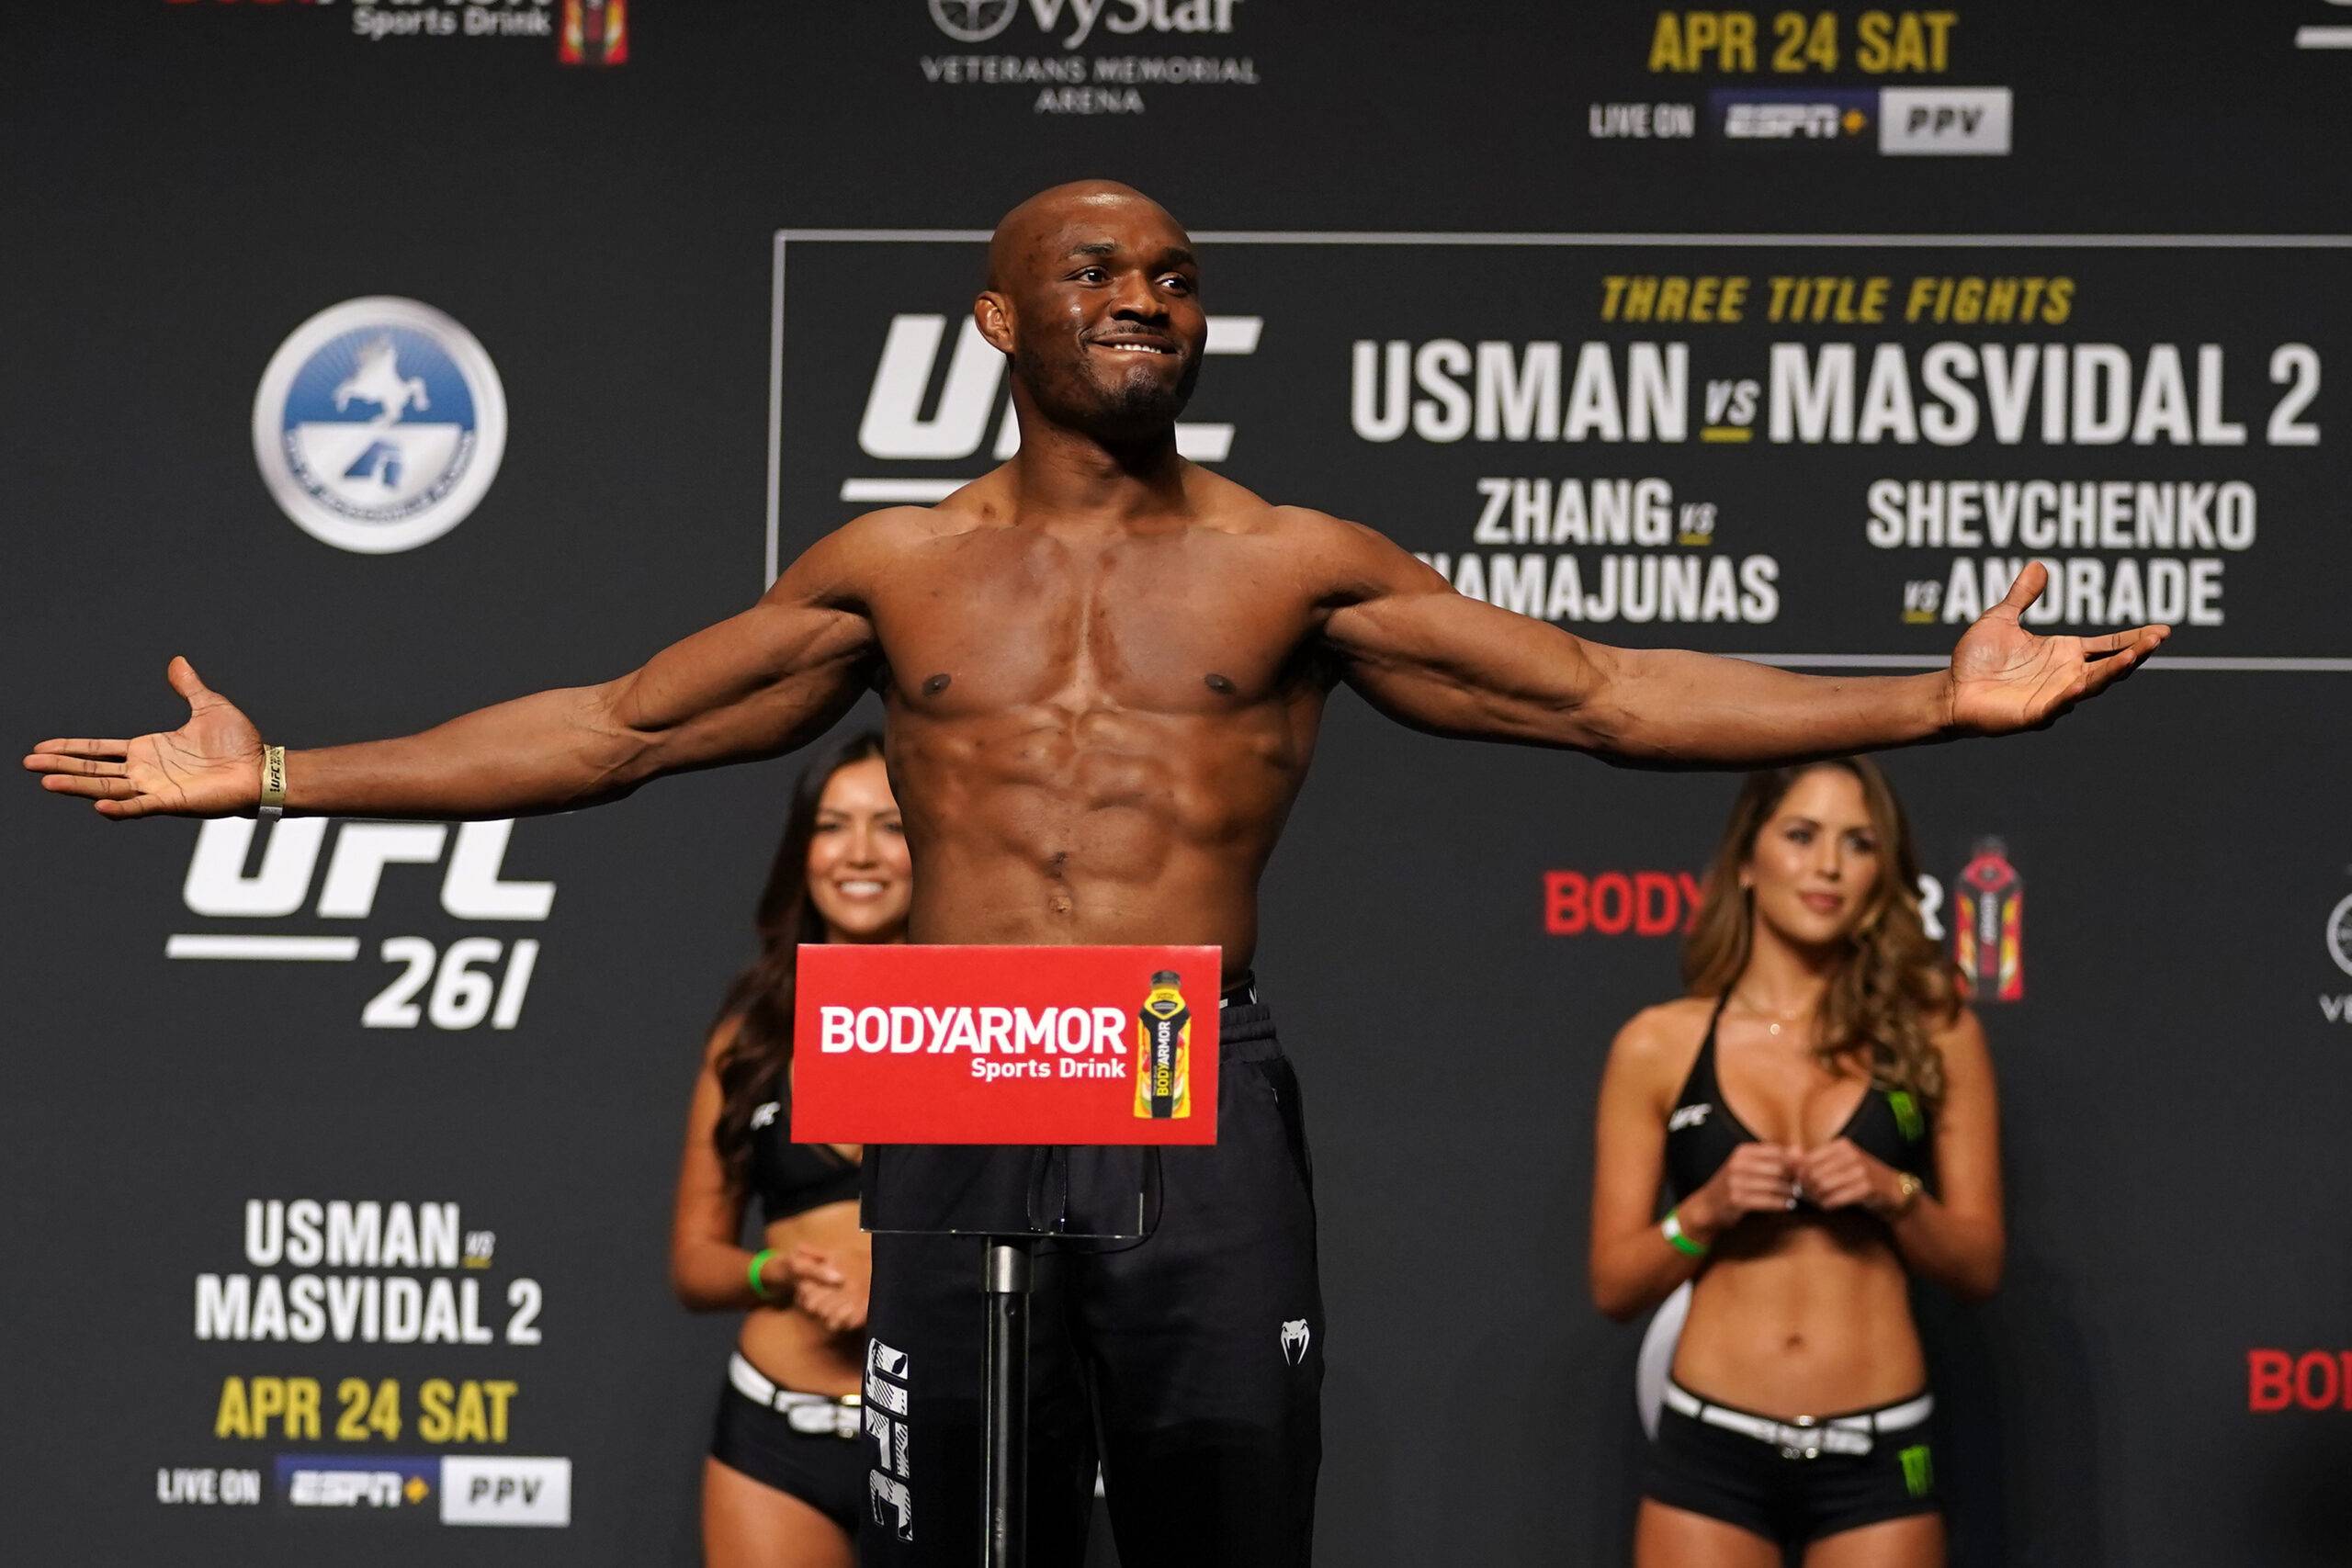 Kamaru Usman is on his way to becoming the greatest MMA fighter of all time, according to Dana White